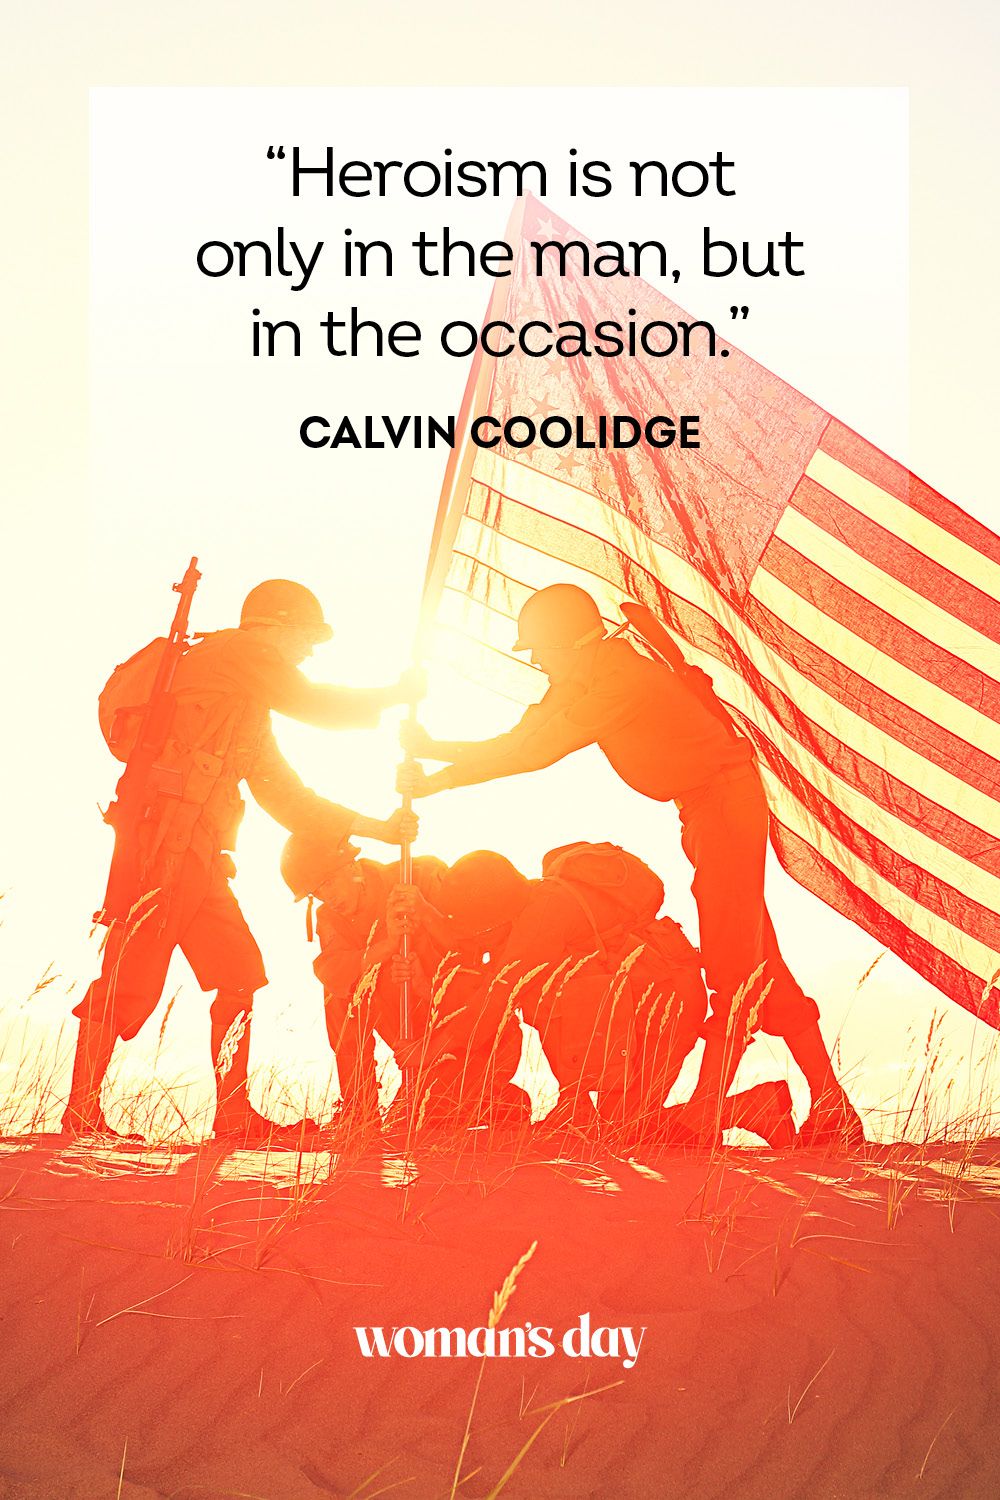 40 Best Memorial Day Quotes For 21 Quotes That Honor Fallen Soldiers